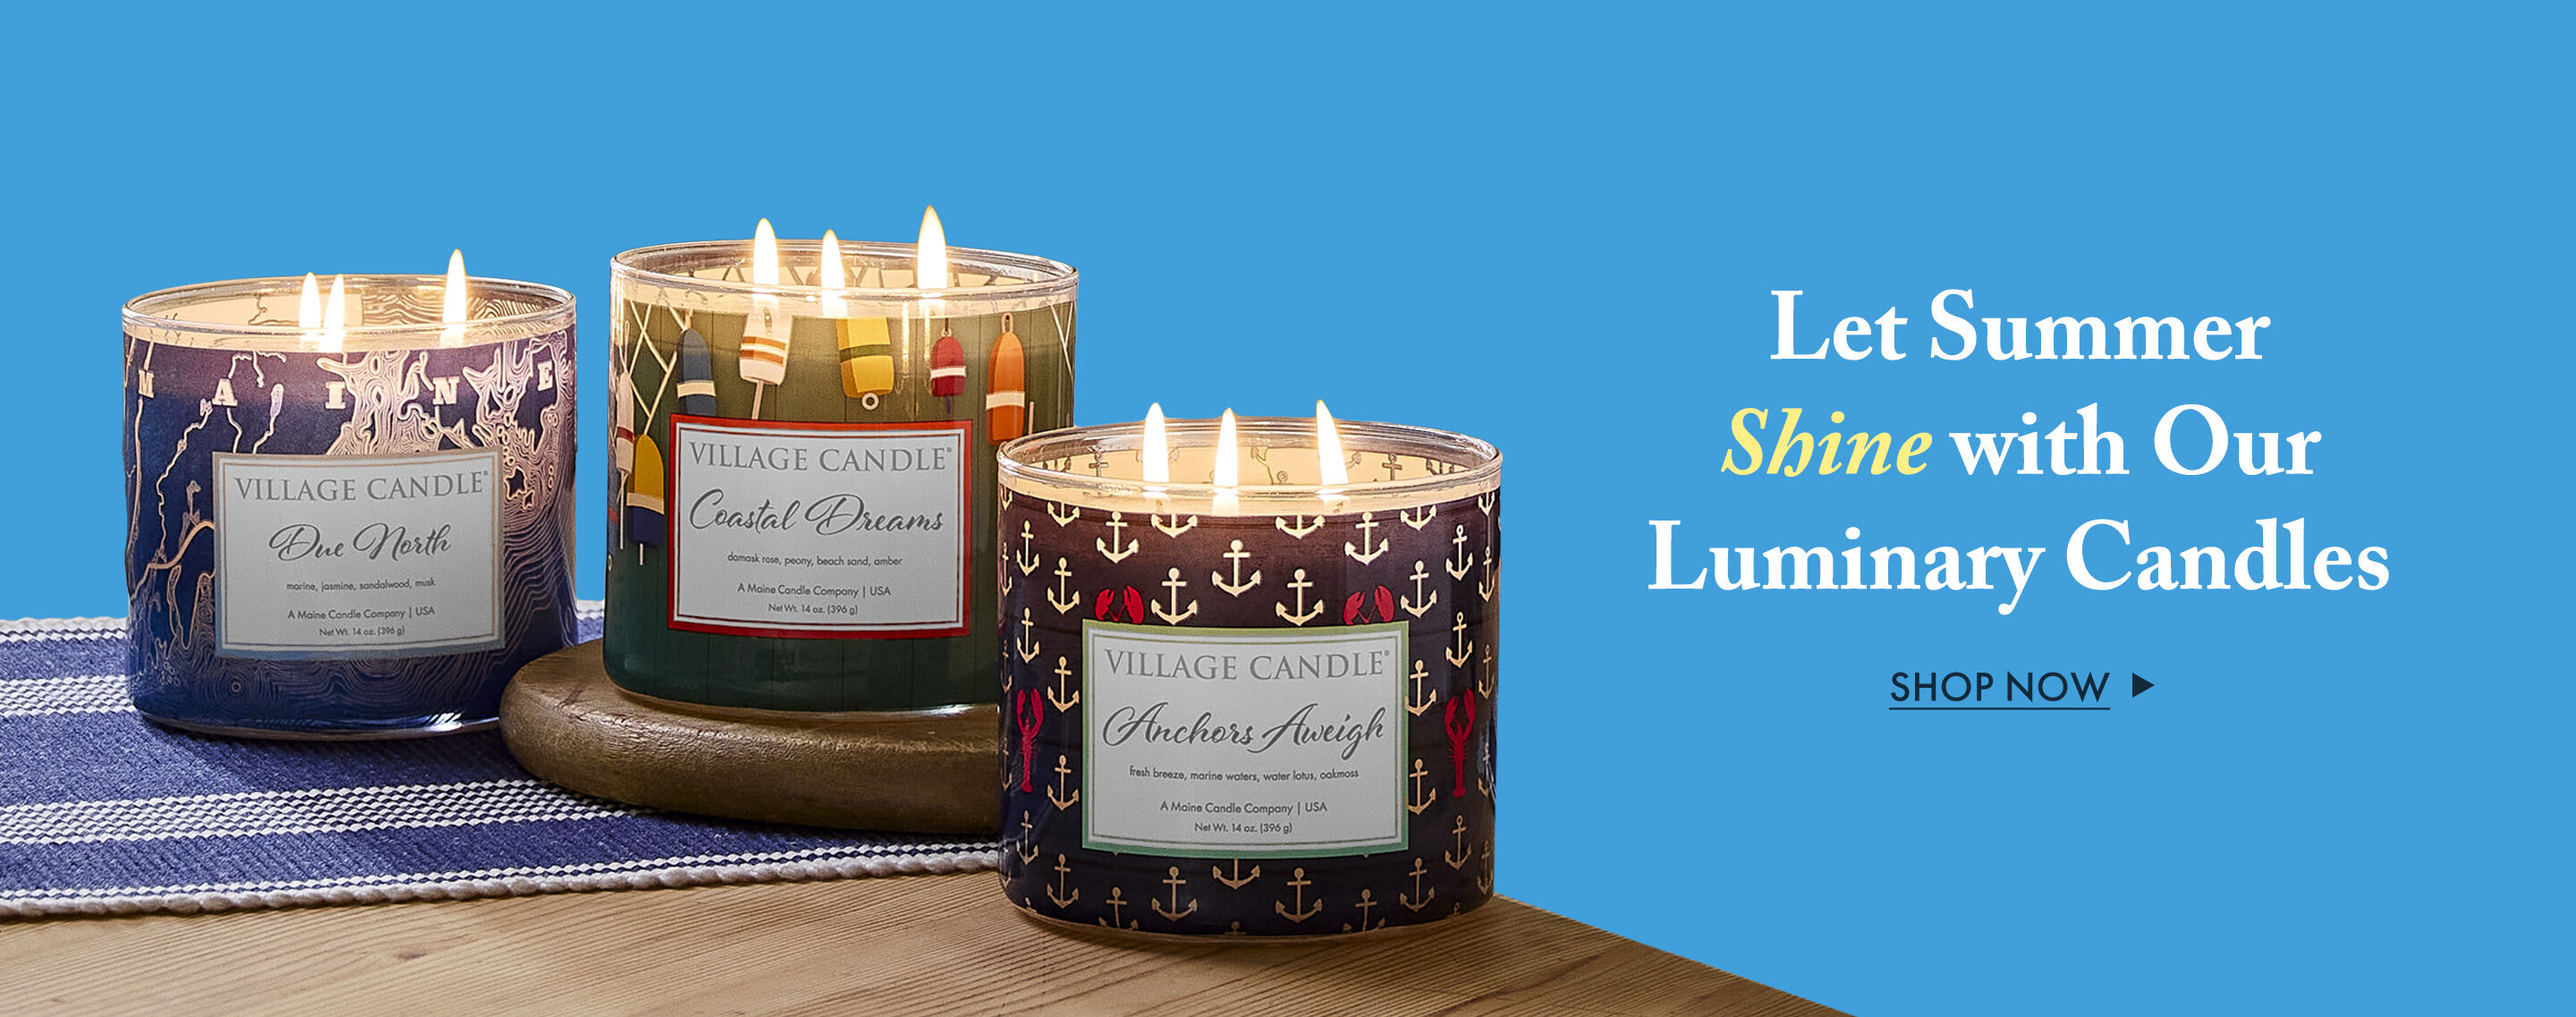 Let Summer Shine with Our Luminary Candles - Shop Now